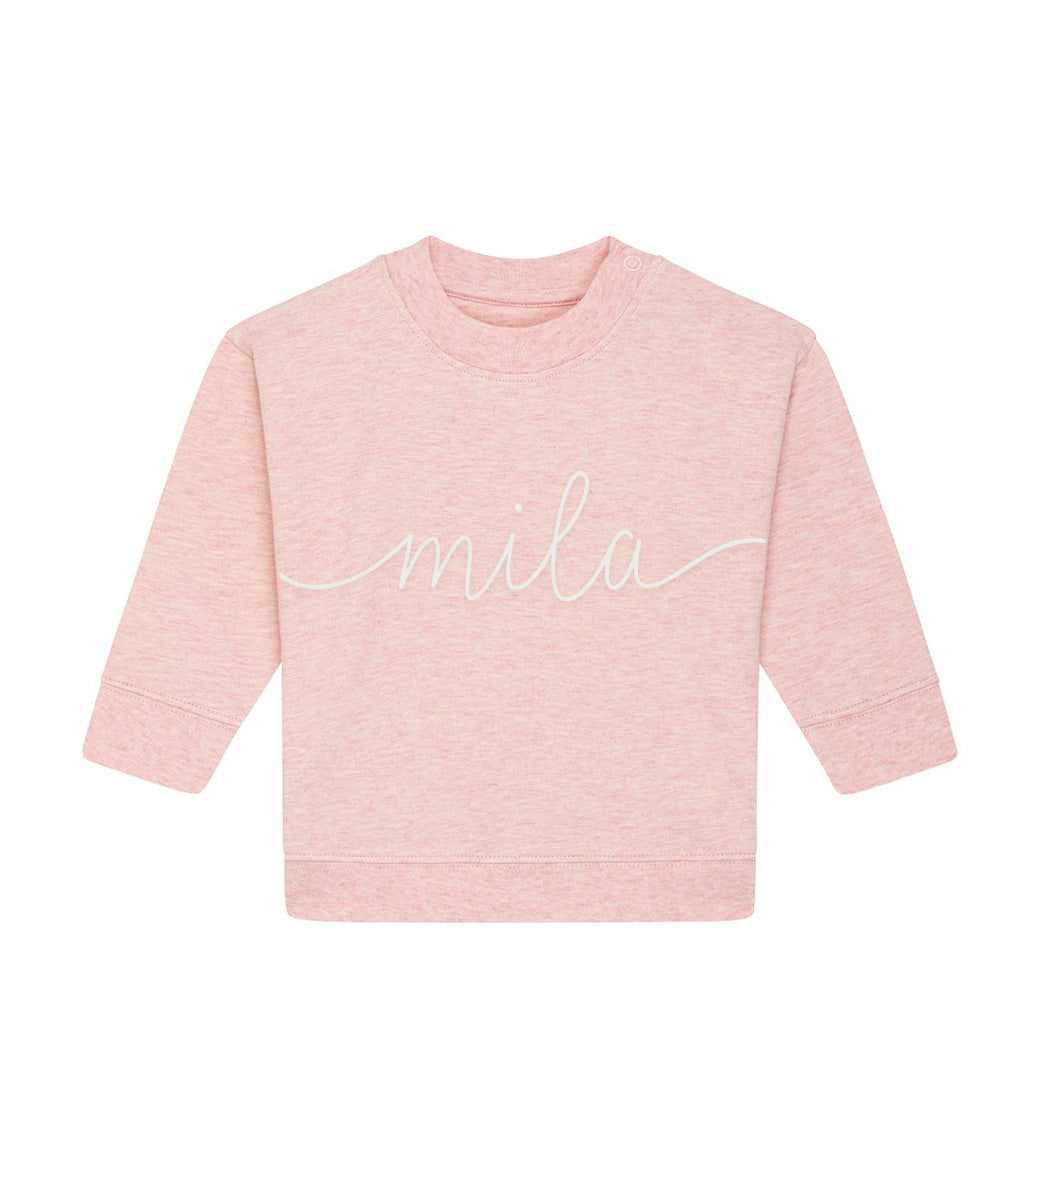 Baby name sweater // Flow